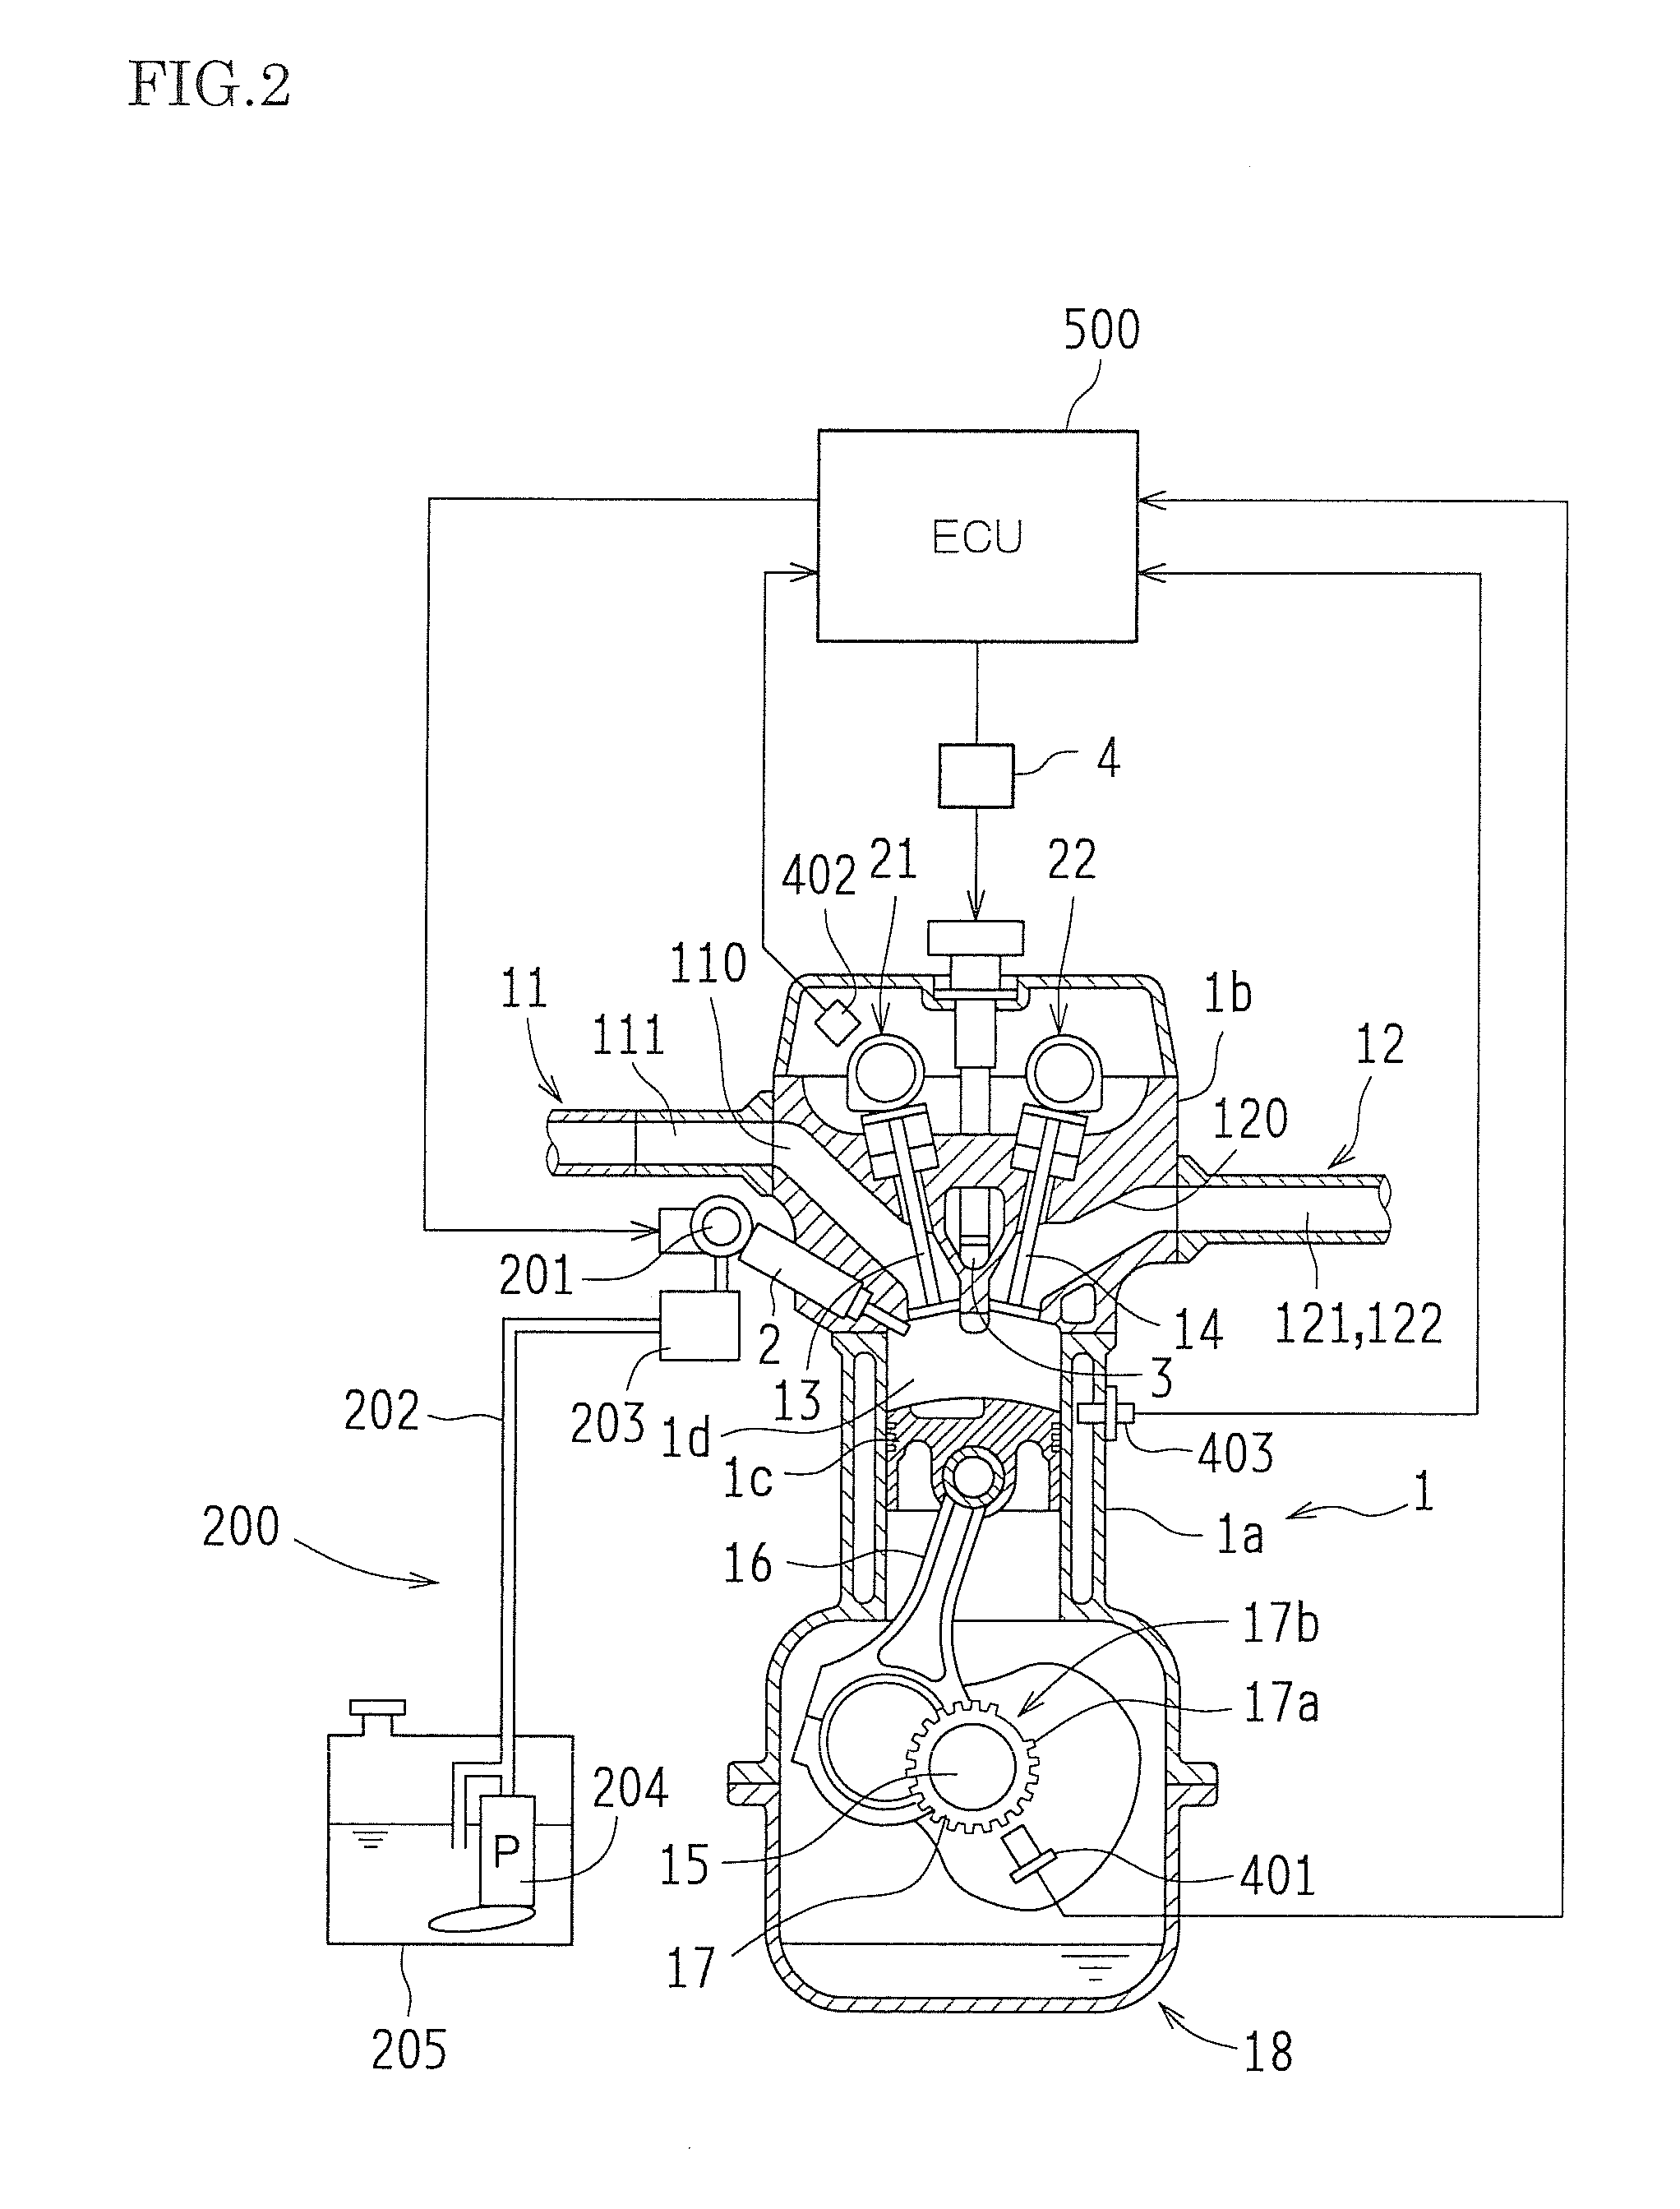 Supercharger-equipped internal combustion engine